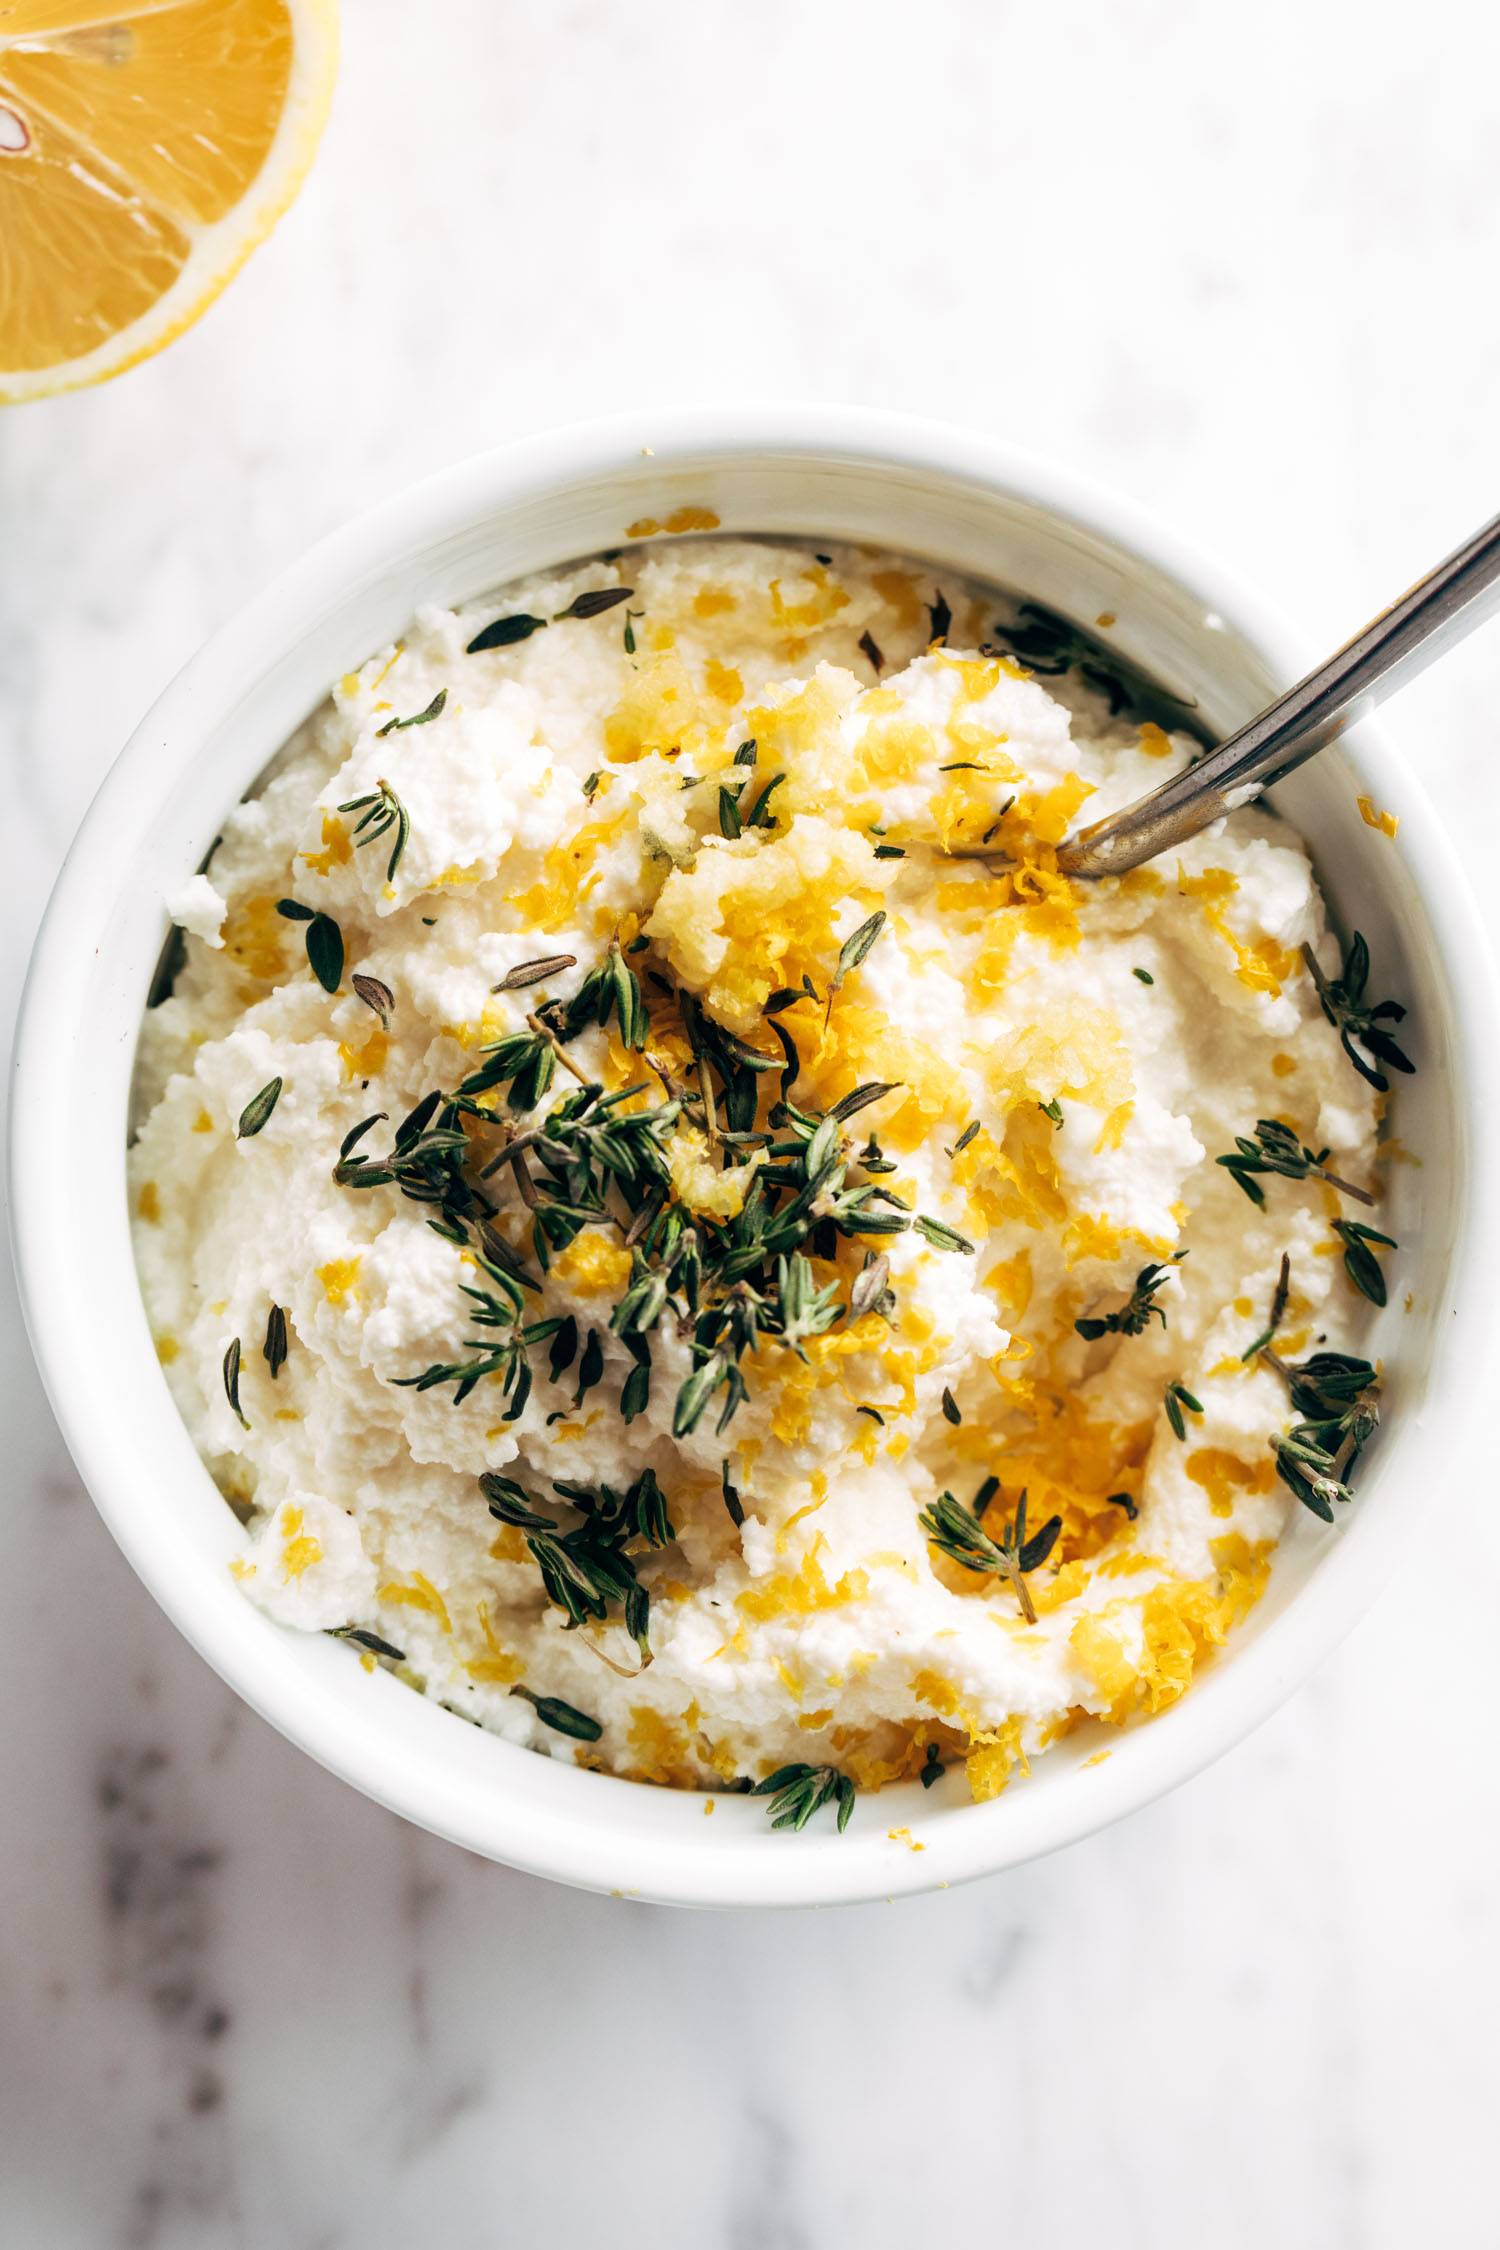 Whipped ricotta in a bowl.